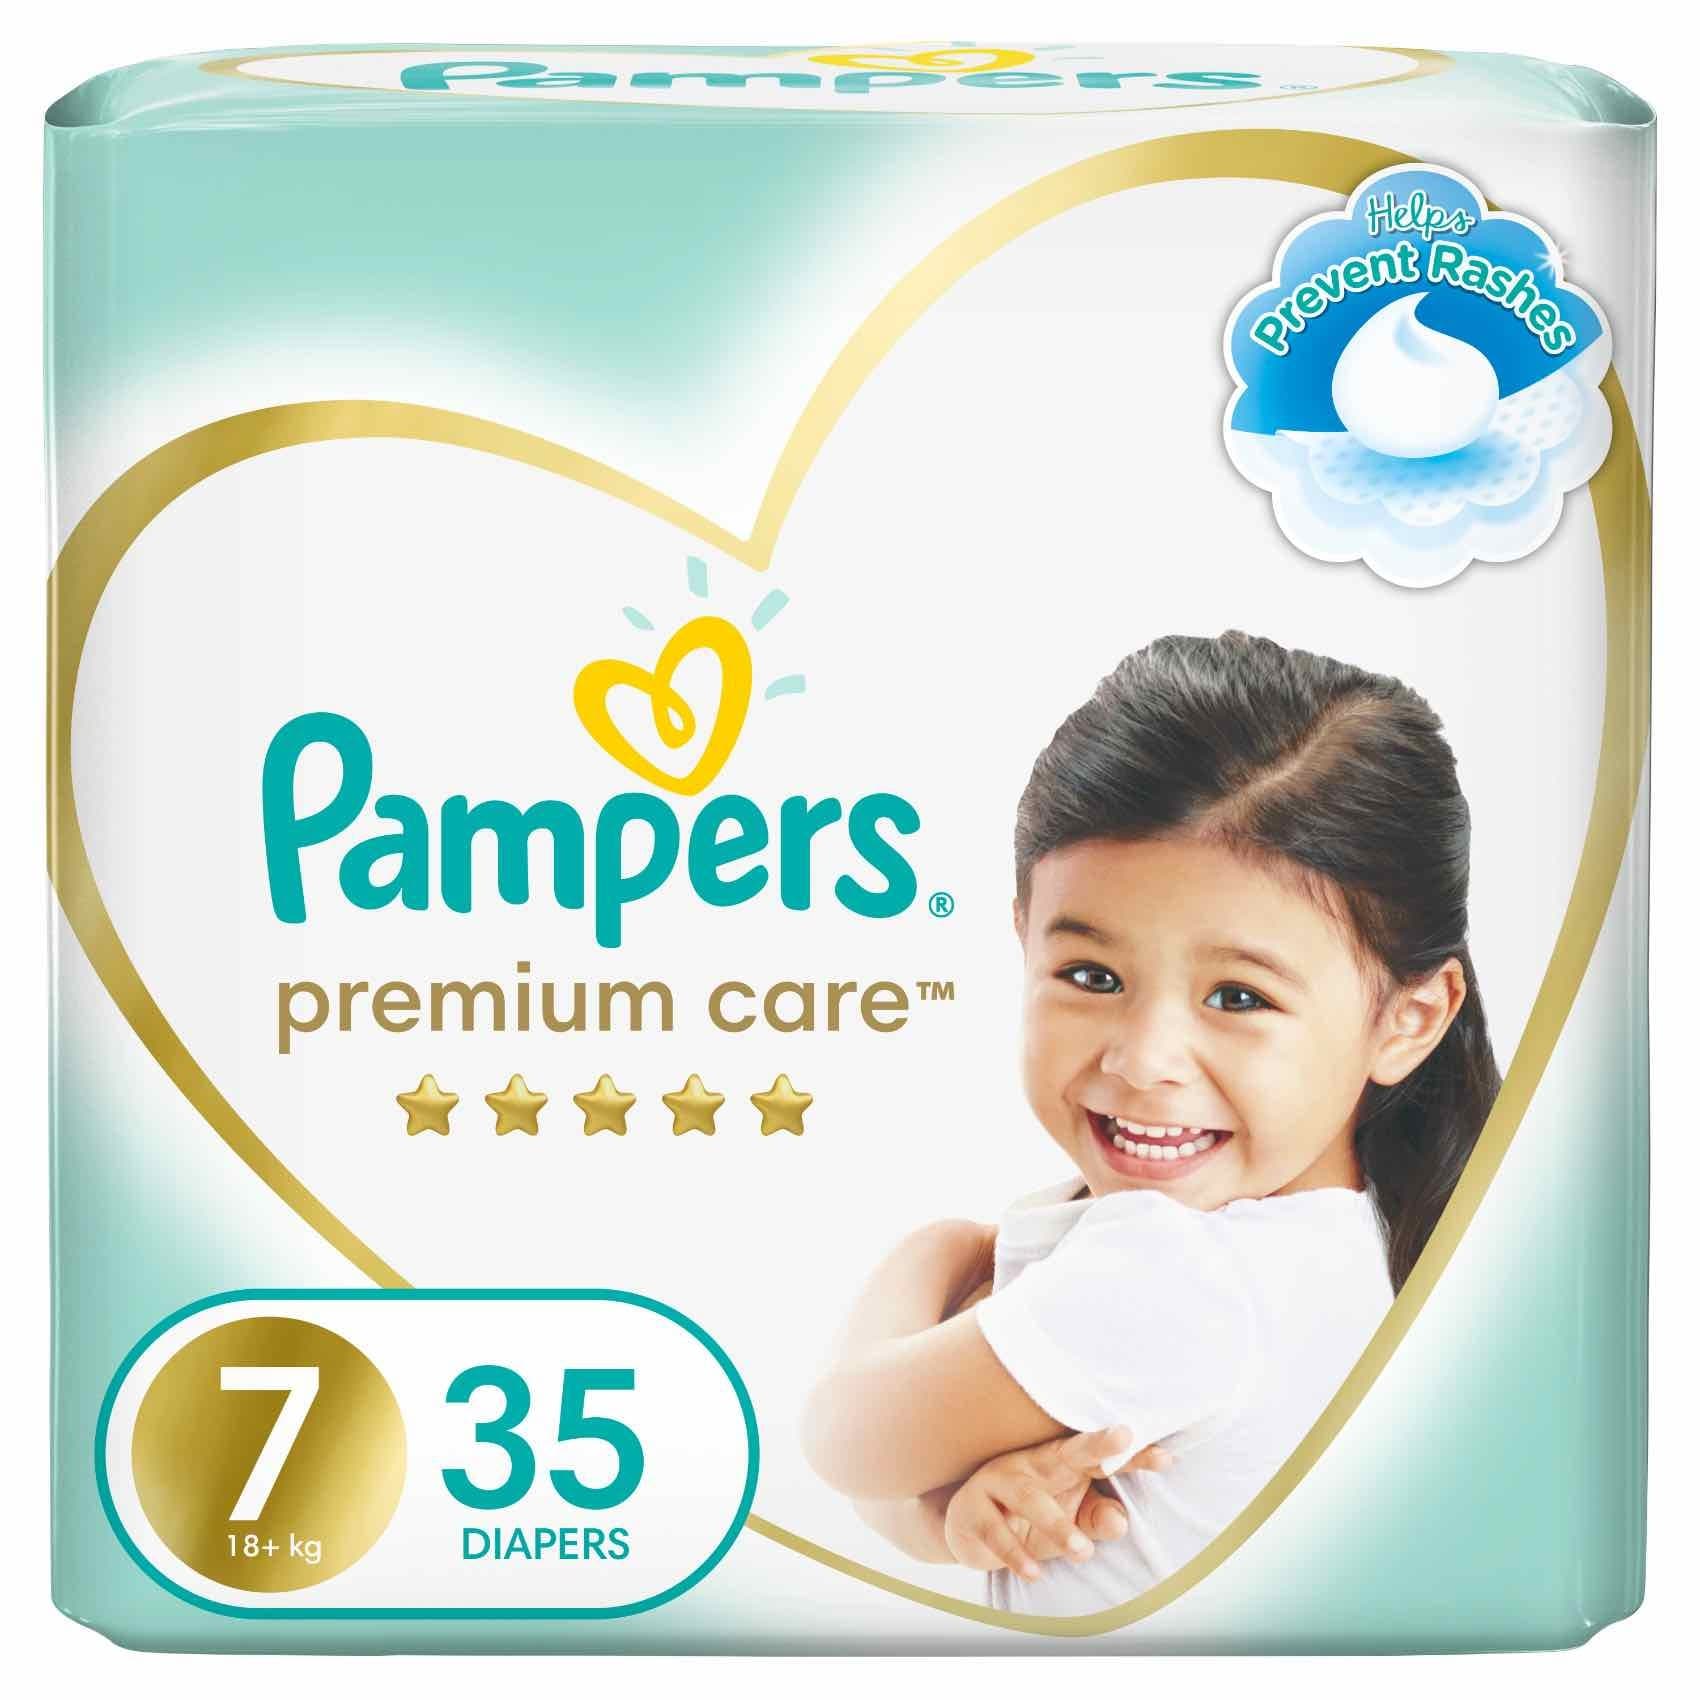 Buy Pampers Premium Care Taped Baby Diapers Size 7 (18+ kg) 35